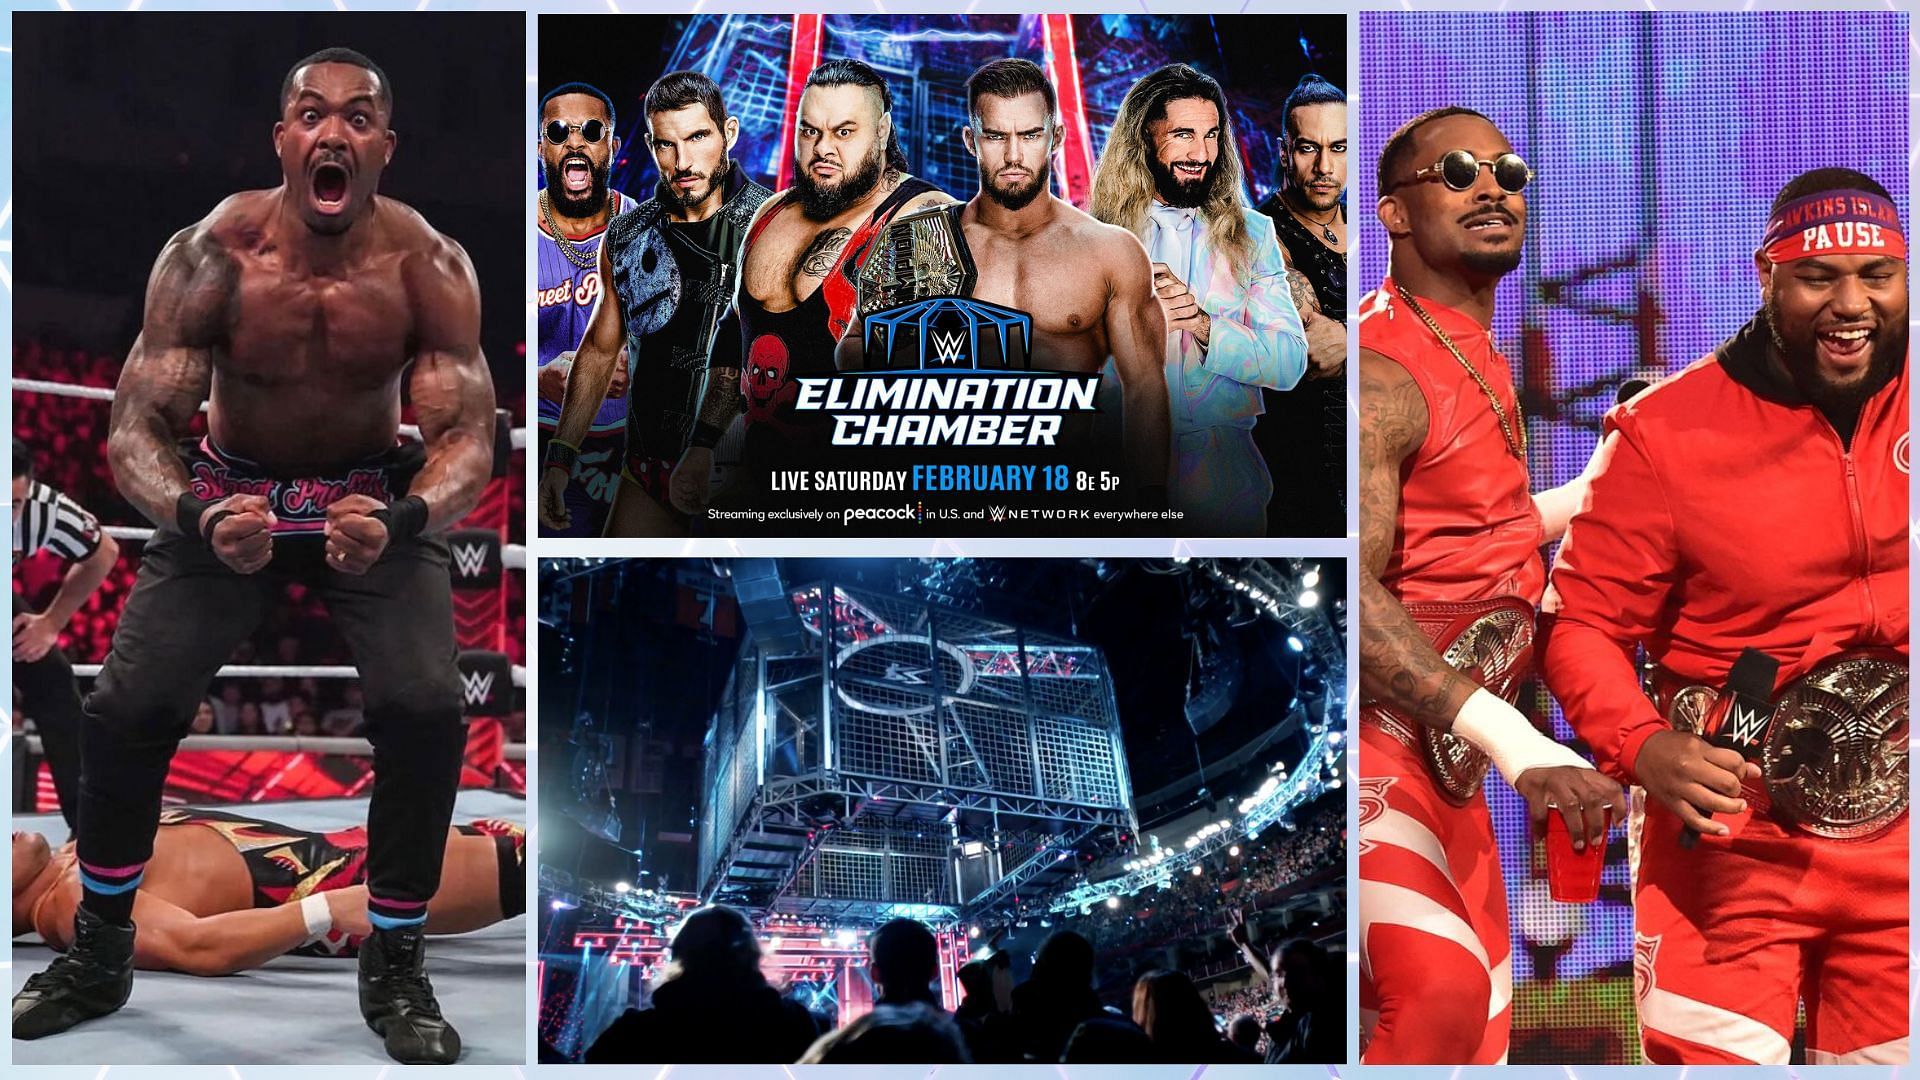 Montez Ford will compete at WWE Elimination Chamber this month